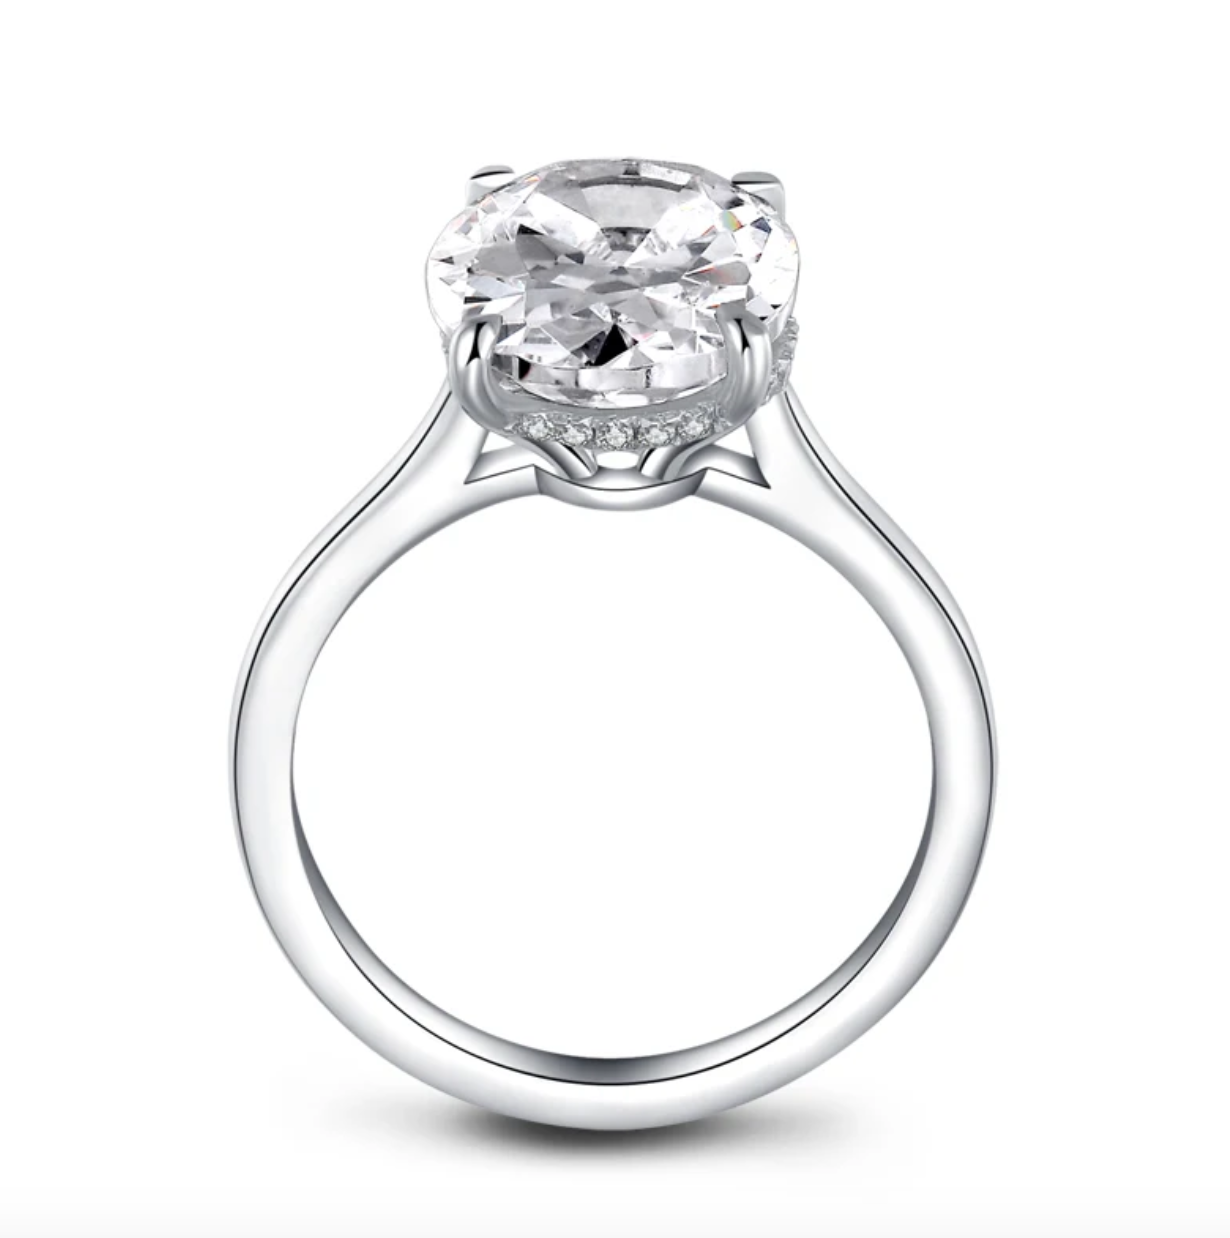 Hailey Bieber, Oval Cut Engagement Ring, 5 Carats, Gold